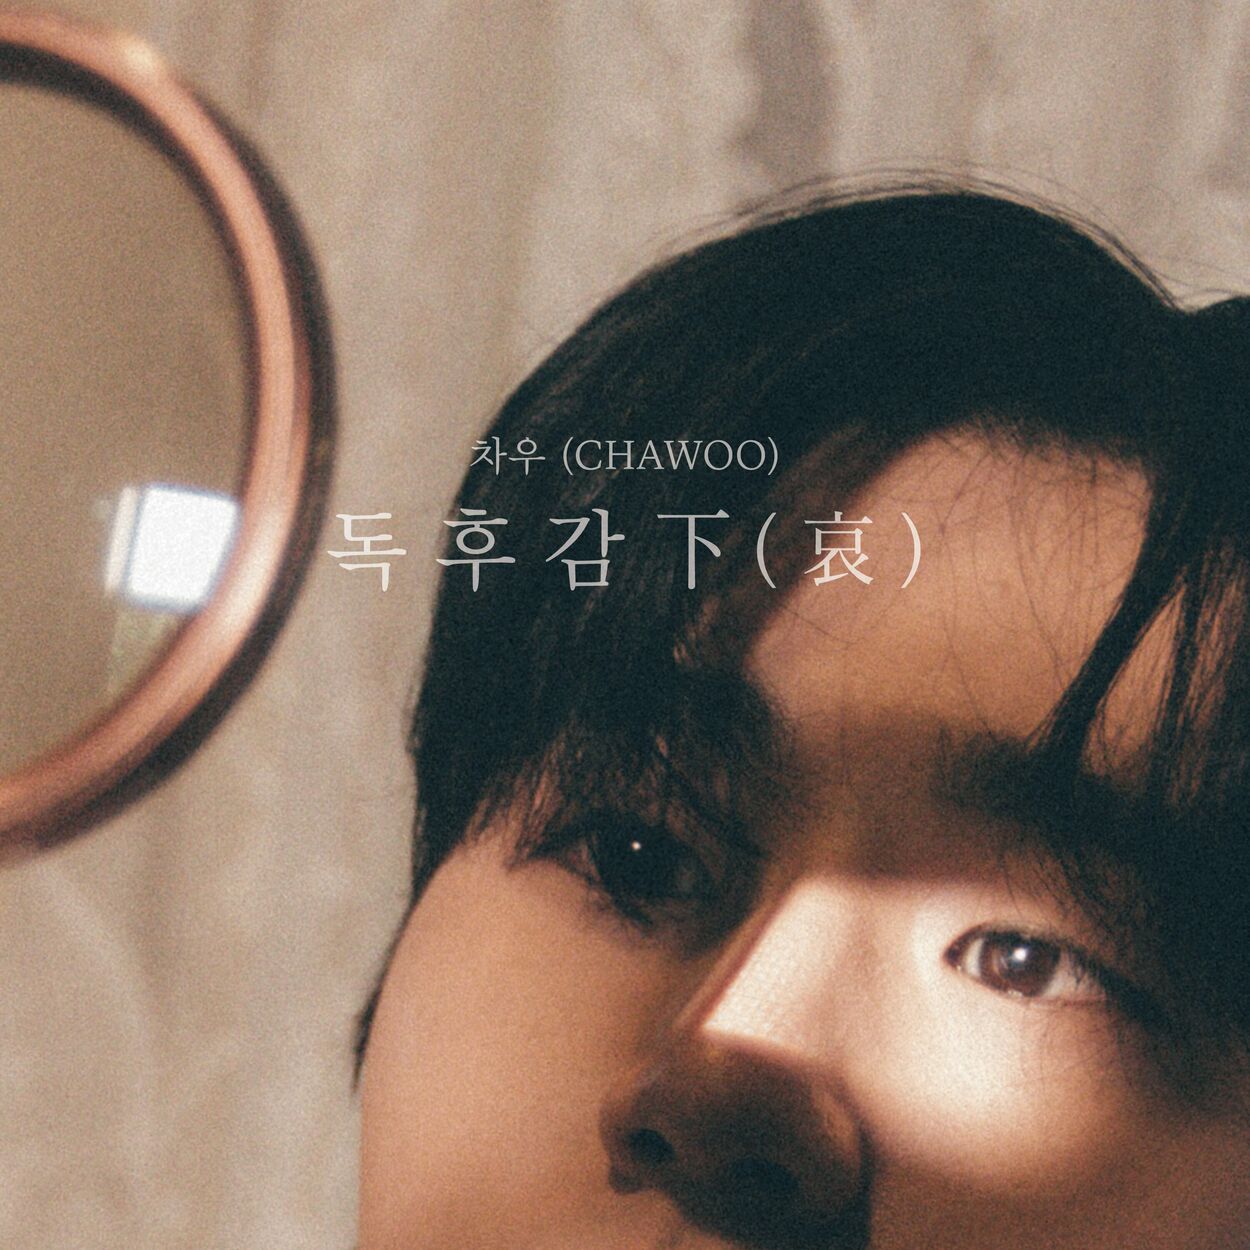 Chawoo – Report of Love 下 (哀) – EP